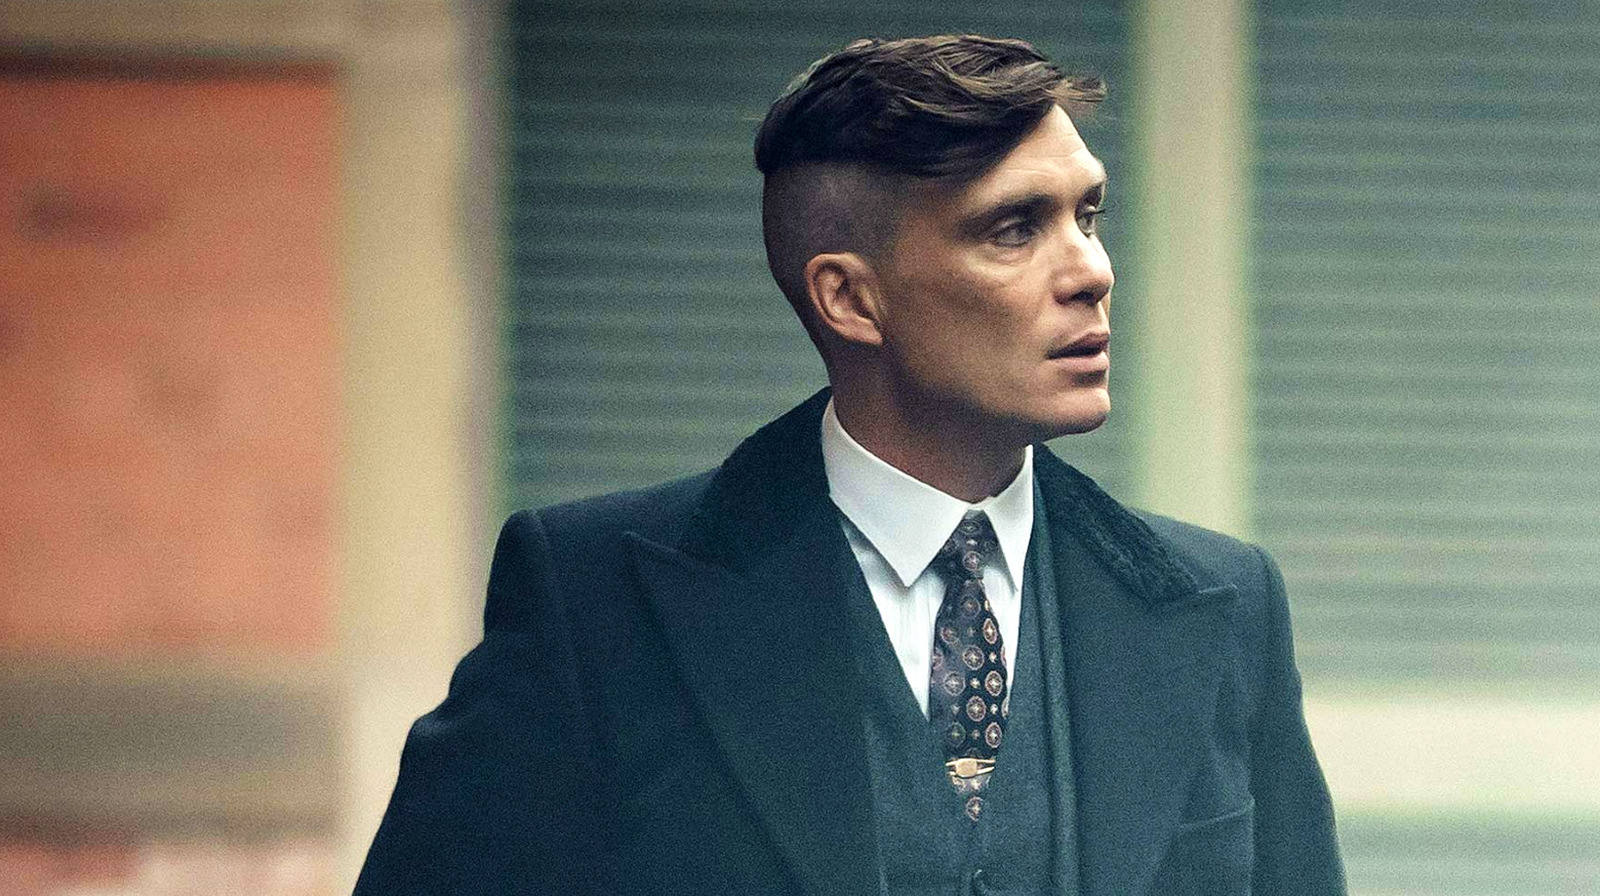 Very strange' to be on 'Peaky Blinders' set without Helen McCrory, Cillian  Murphy says